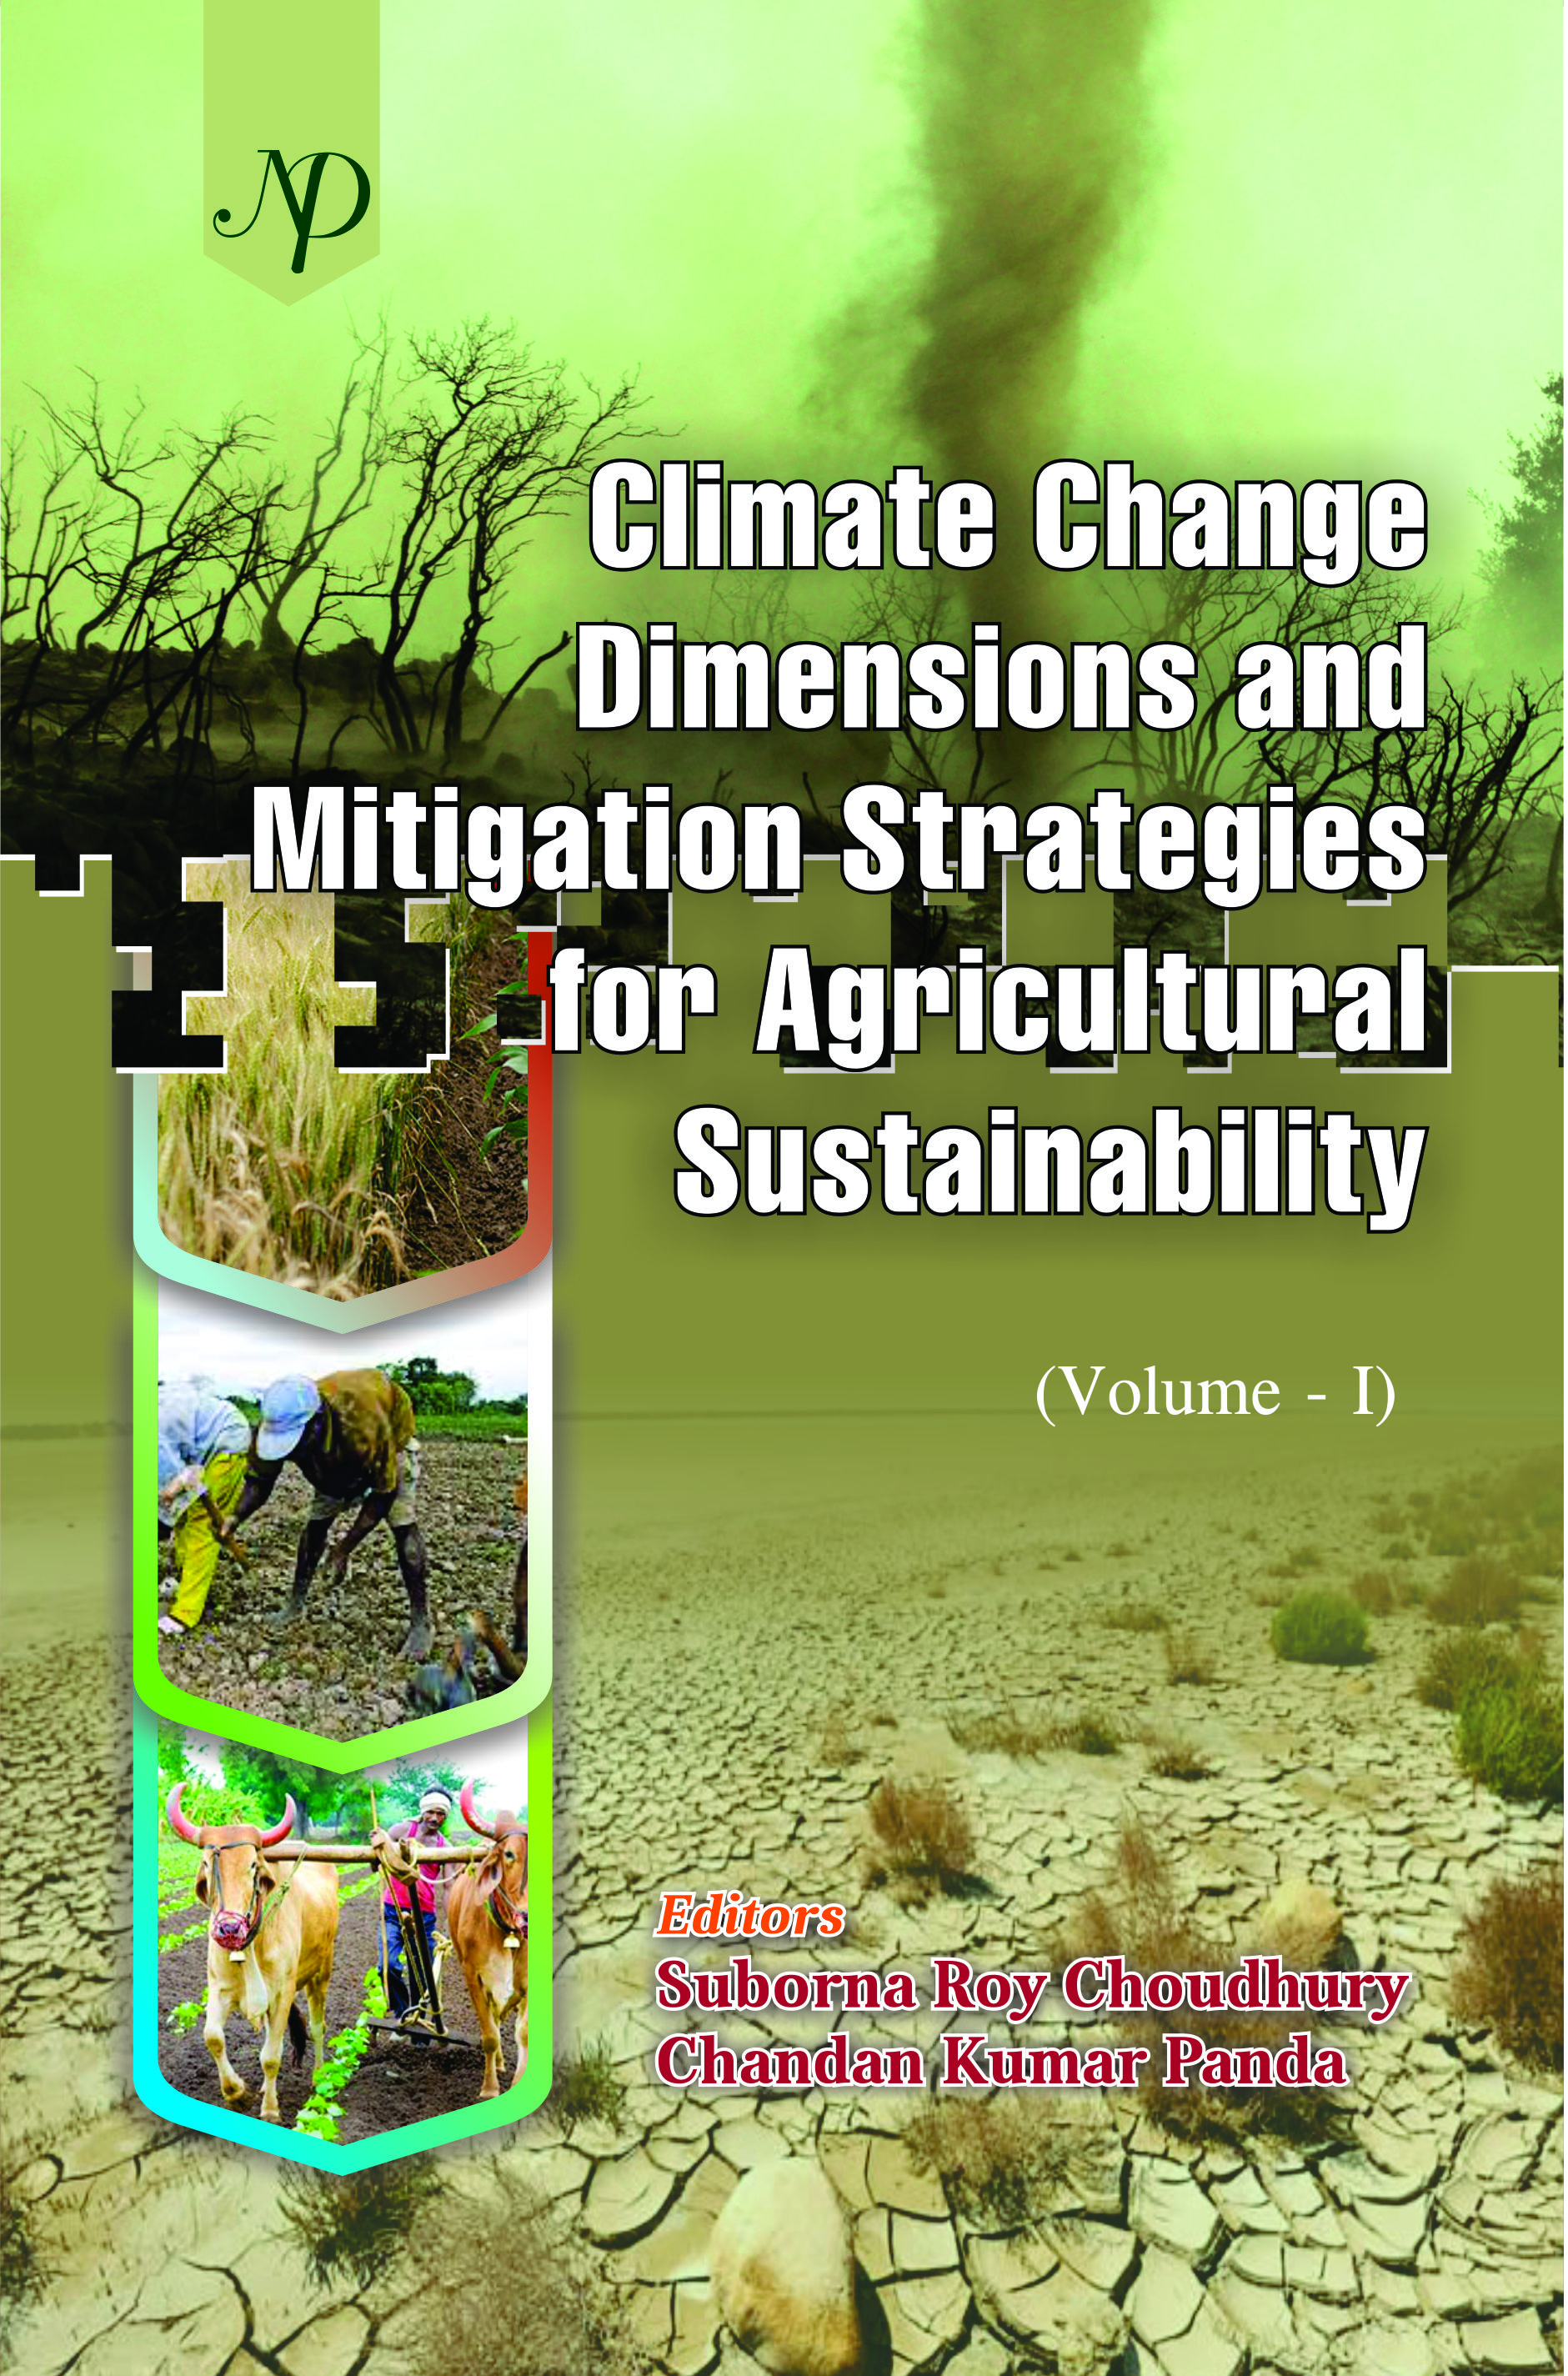 Climate Change Dimensions and Mitigation Strategies Cover.jpg